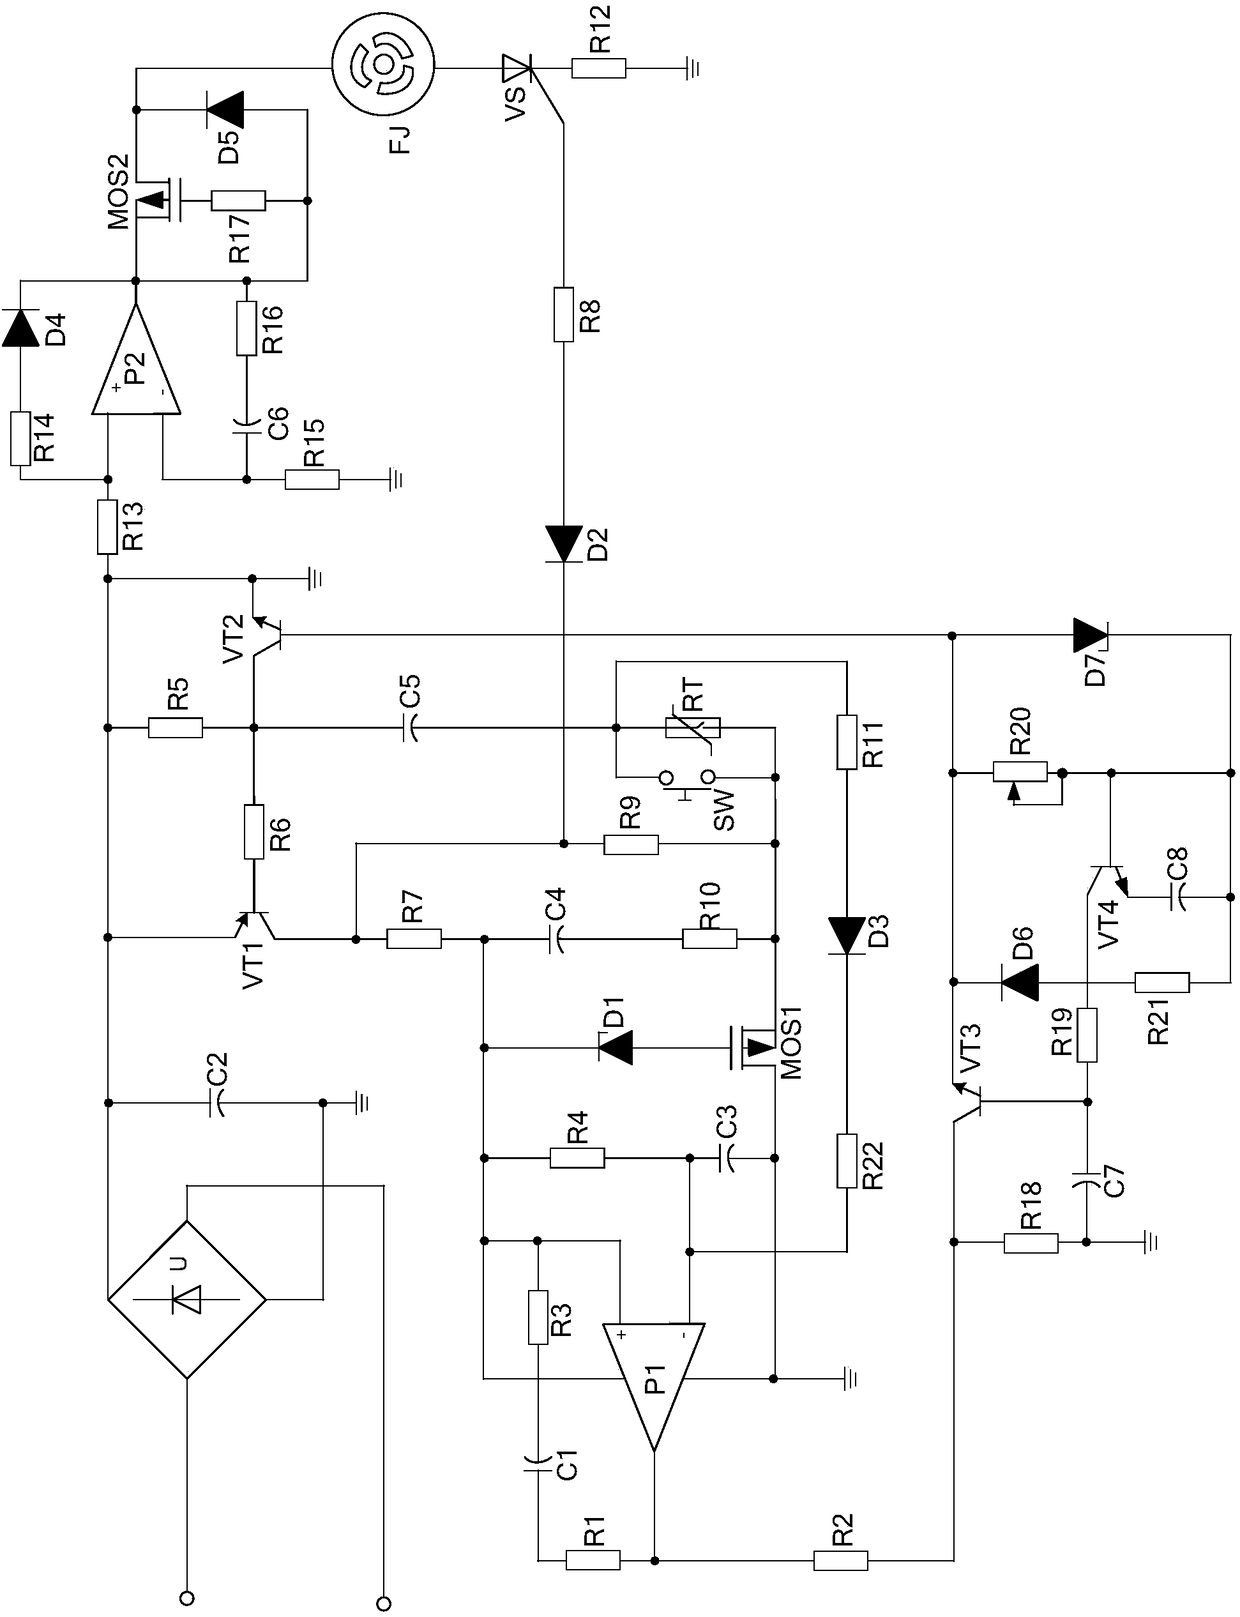 A high-current suppression type energy-saving control circuit for a ventilation fan